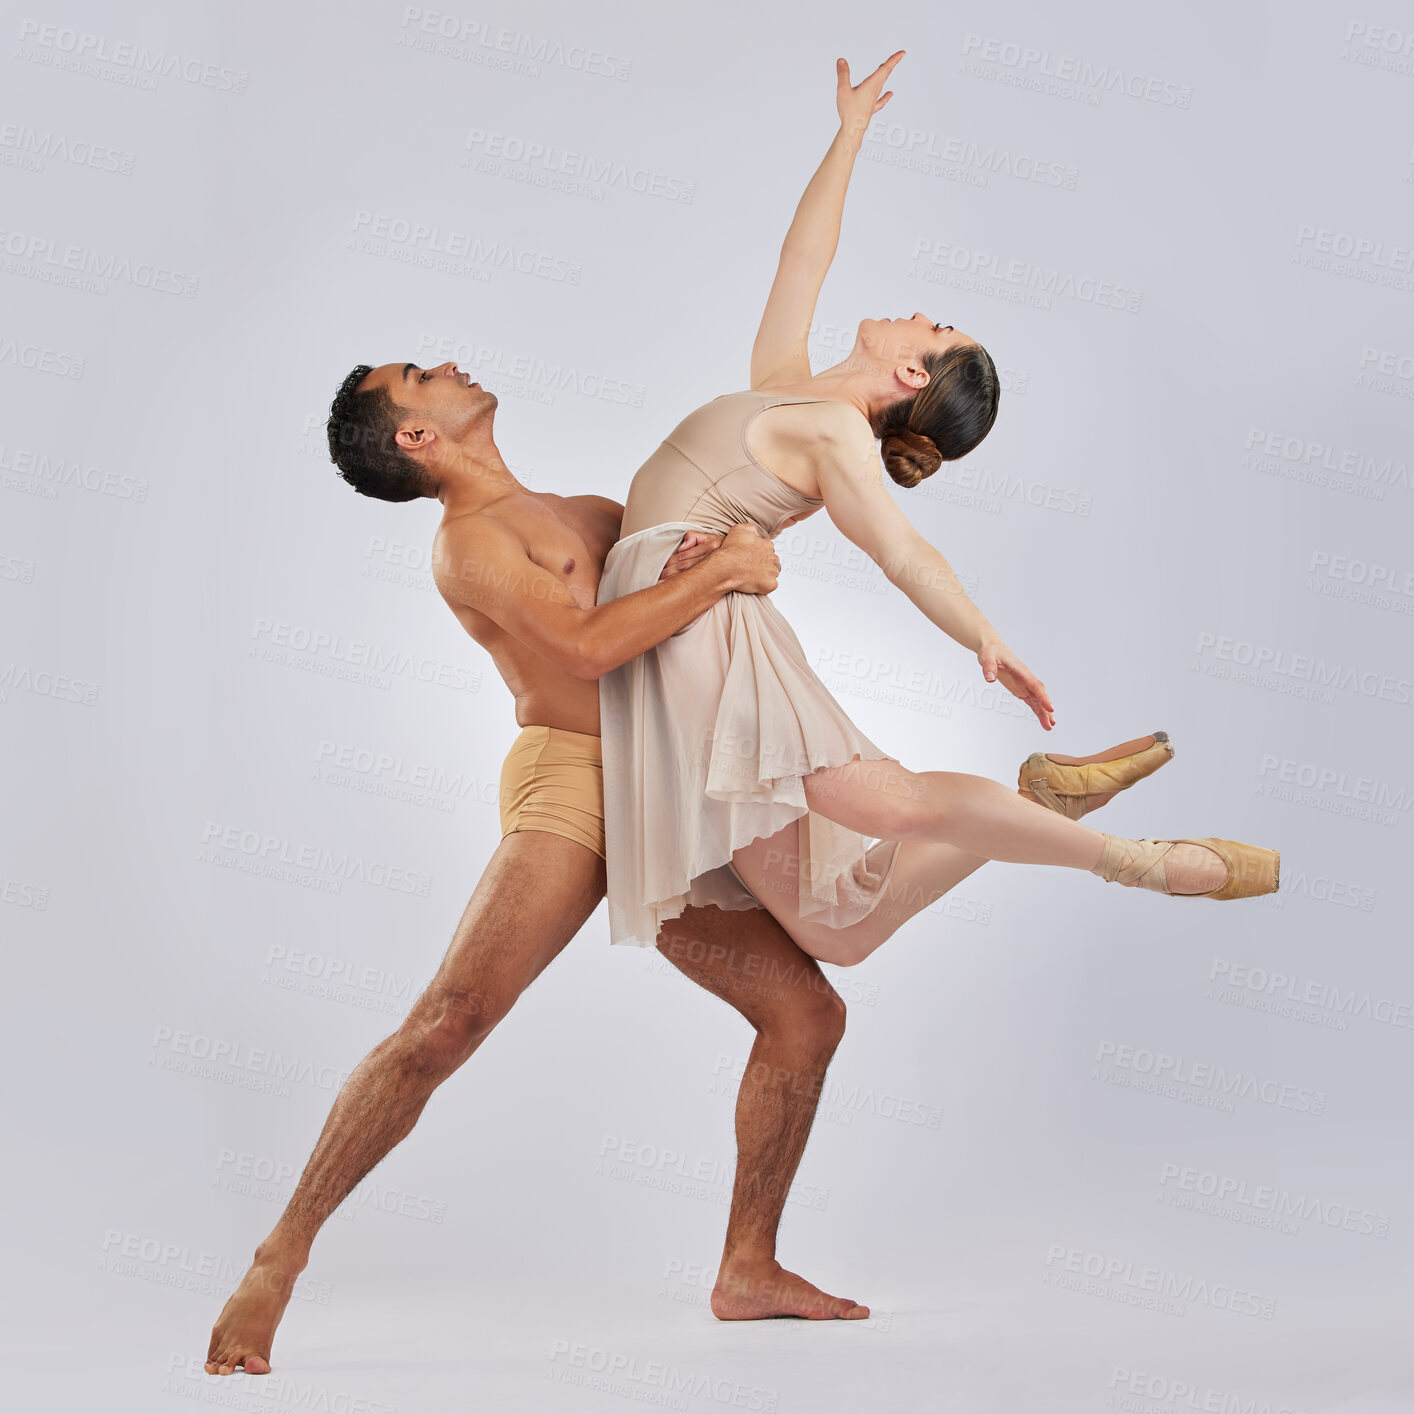 Buy stock photo Studio shot of a young man and woman performing a ballet recital against a grey background